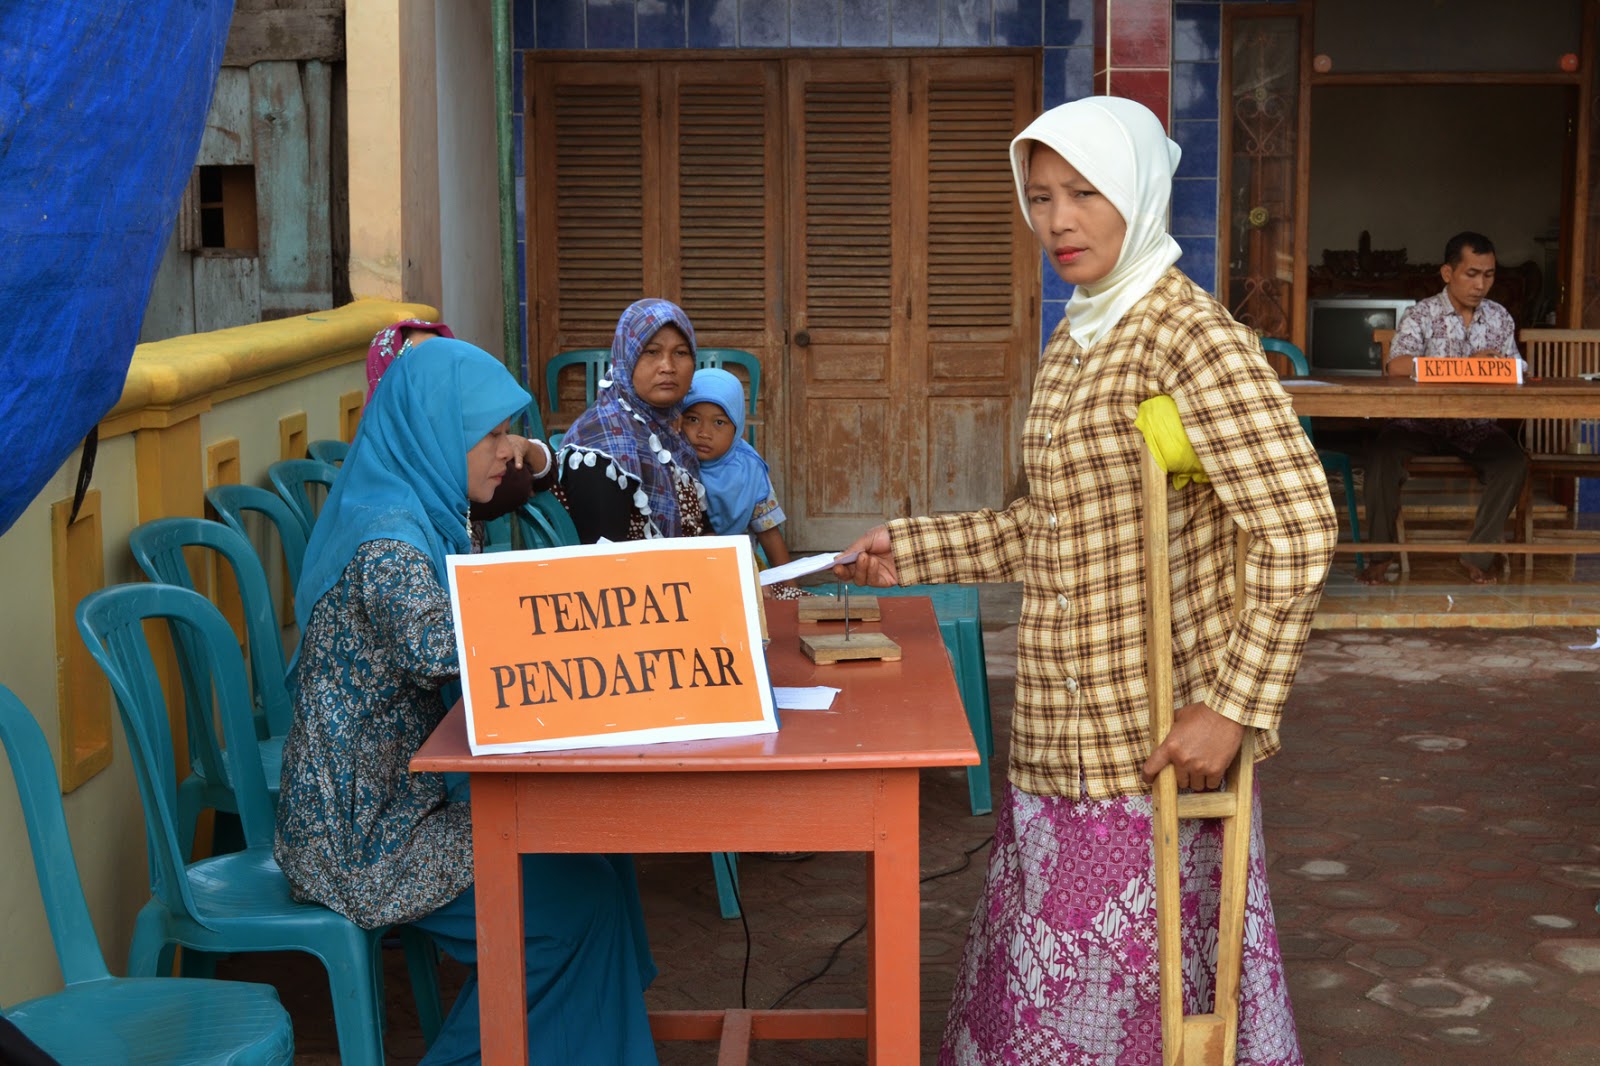 Phisicaly impaired viter is reistaring to vote in Central Java